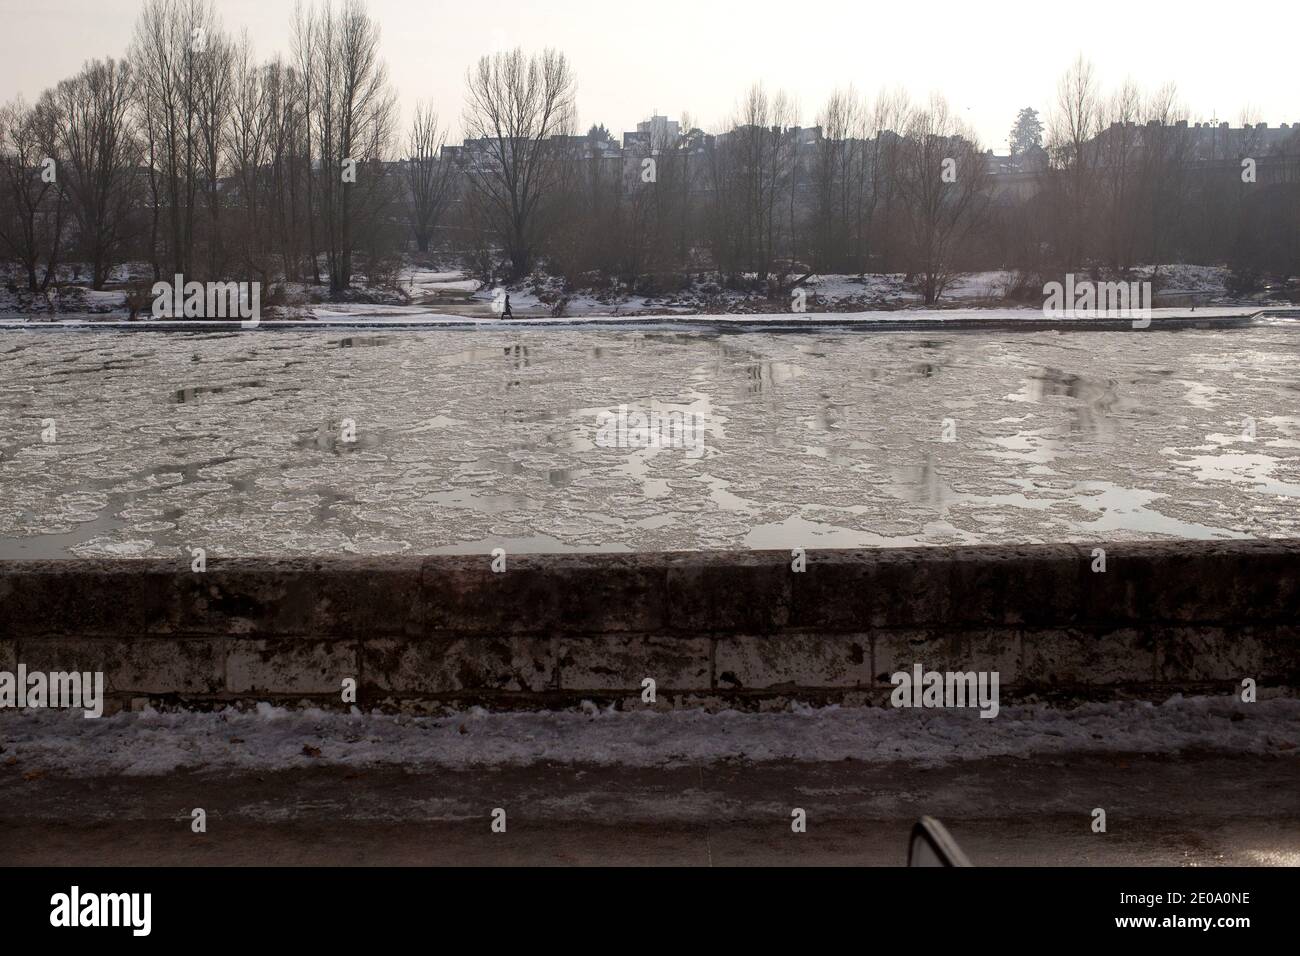 A view of the river Le Loiret under snow in Orleans, Southern of Paris, France, on February 9, 2012. Photo by Stephane Lemouton/ABACAPRESS.COM. Stock Photo